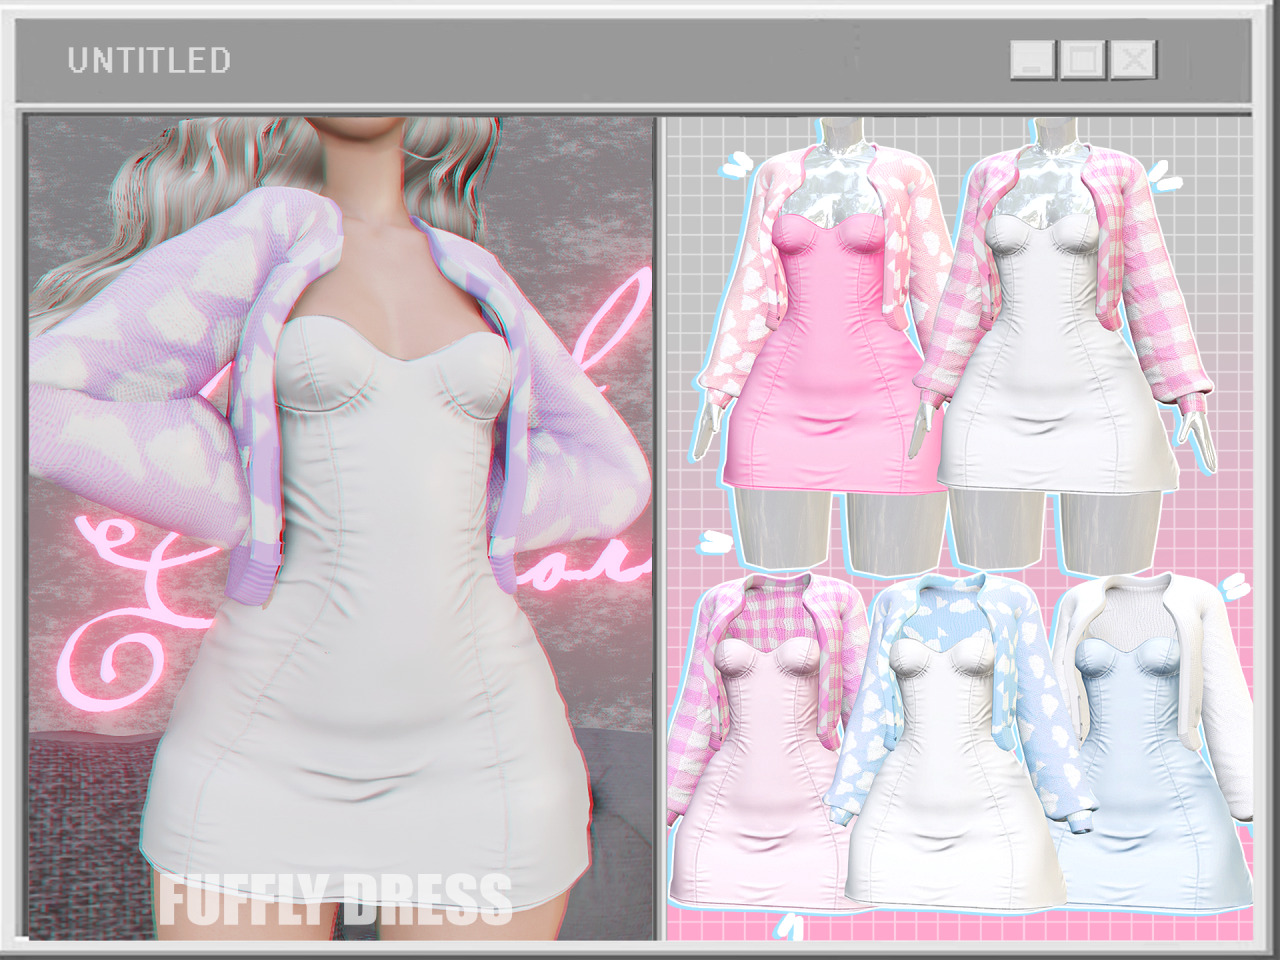 unknown66irl:
“ *：・ﾟFUFFLY DRESS *：・ﾟ
UK66irl Mesh
• 16 swatches
• all lods
• enjoy!
• Early access (available 20 days later)
*：・ﾟ✧¡RESPECT!*：・ﾟ✧
Do not reload.
Do not claim as your own.
Do not upload on monetized sites.
Do not edit my meshes.
Do not...